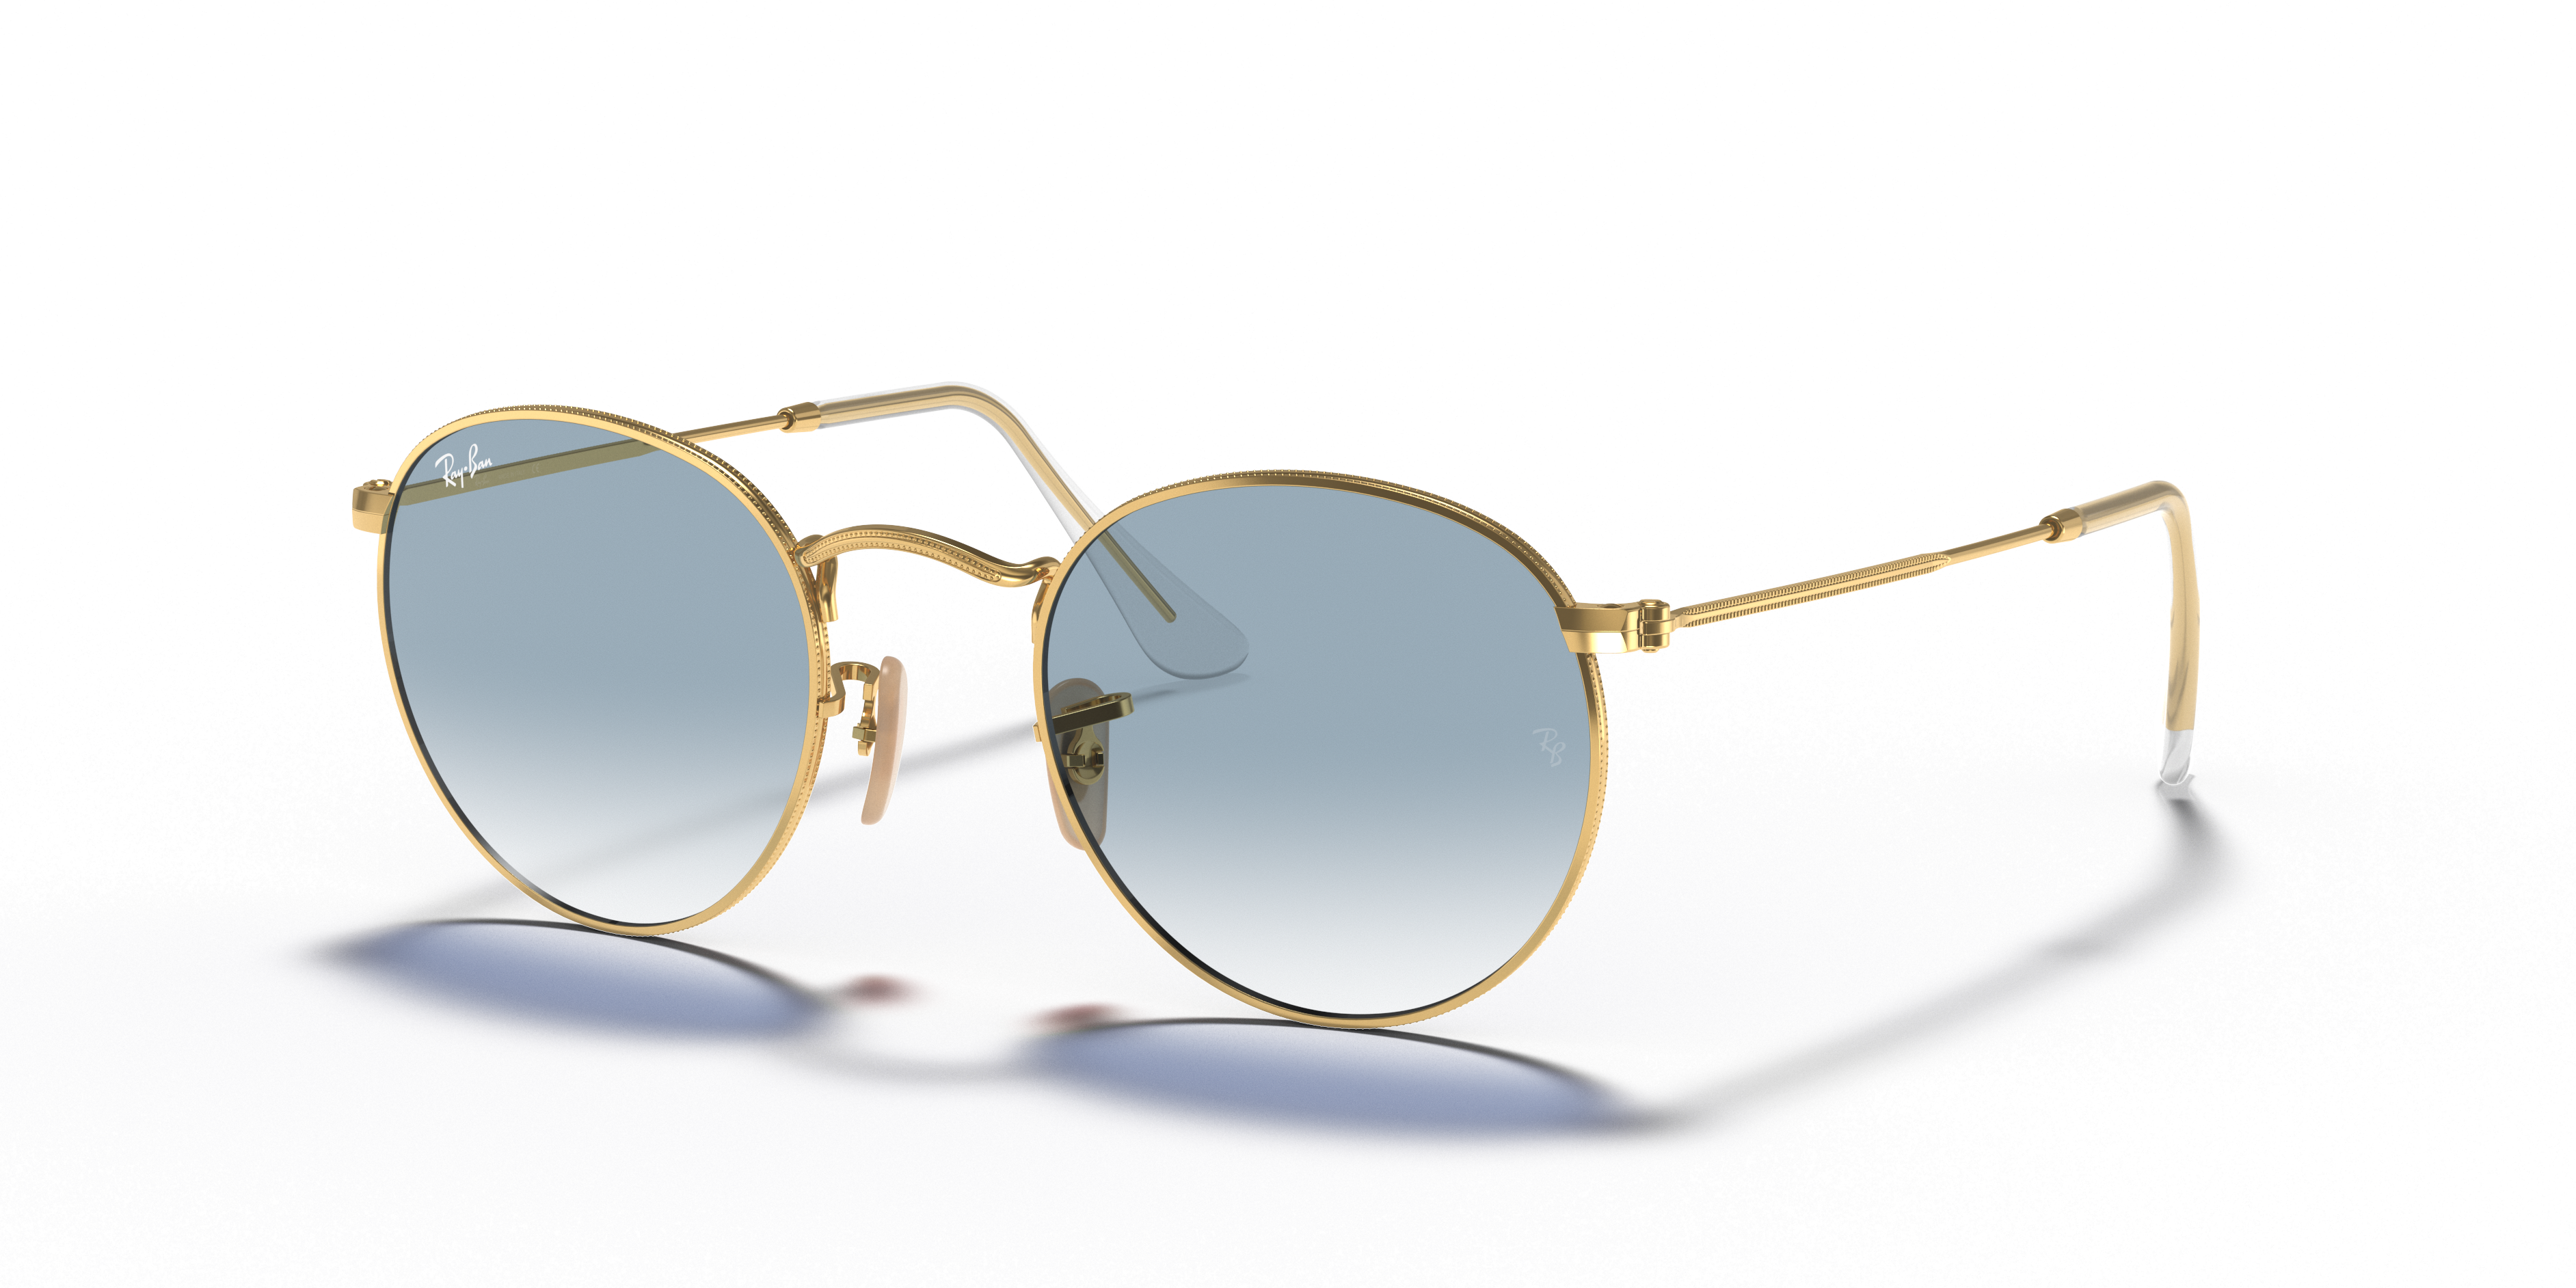 Round Flat Lenses Sunglasses in Gold and Light Blue | Ray-Ban®